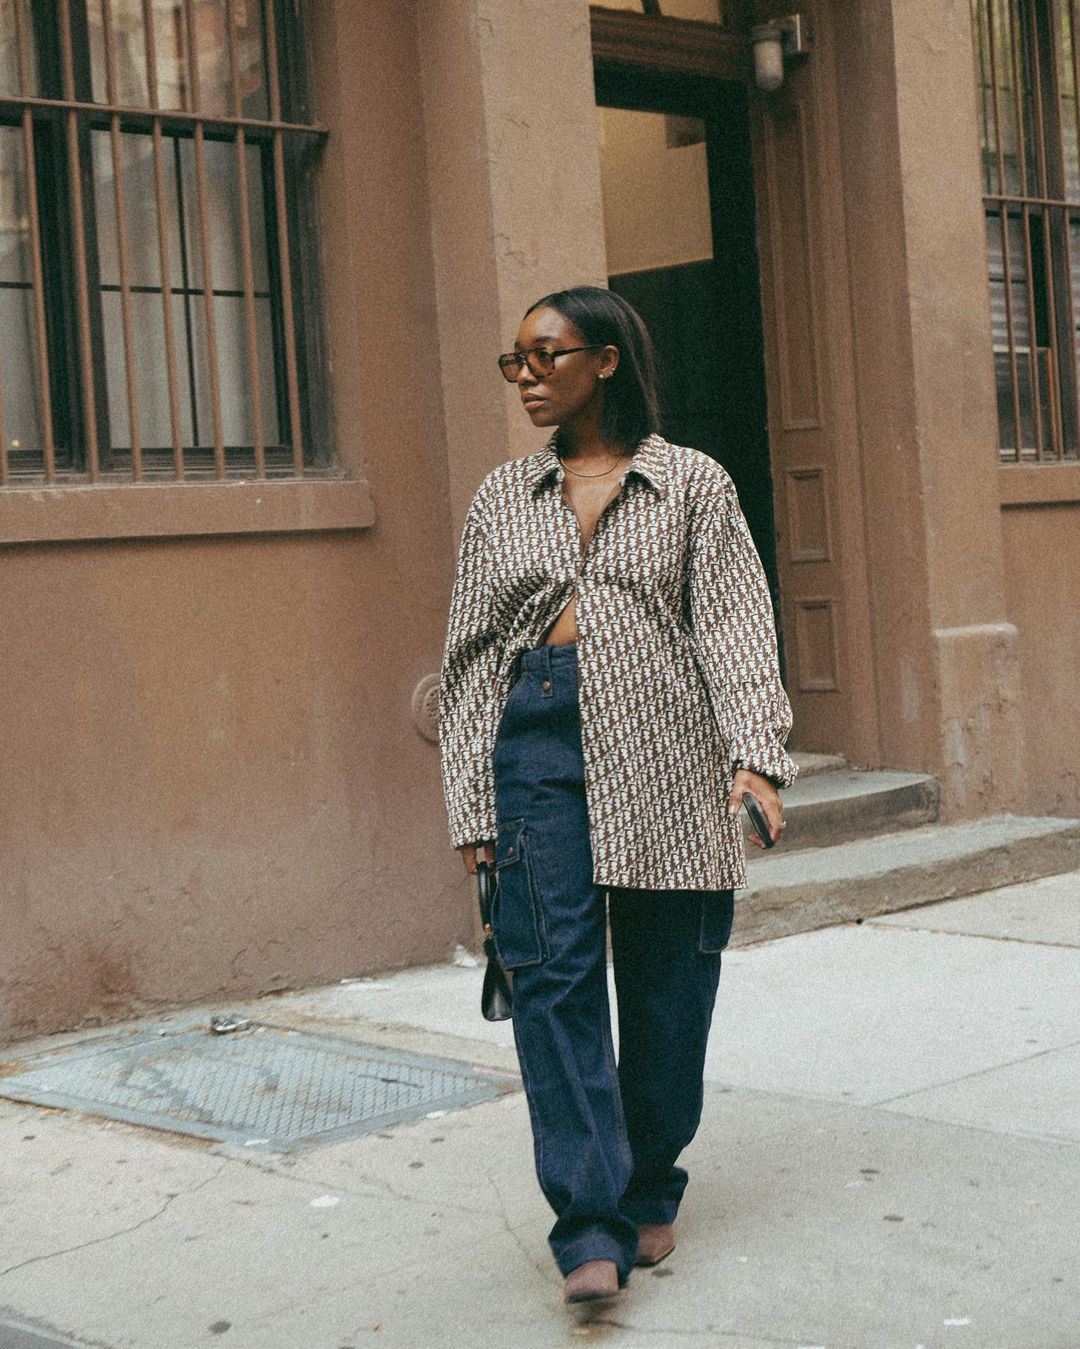 NYFW S/S 2023: 9 Street Style Trends to Keep an Eye On